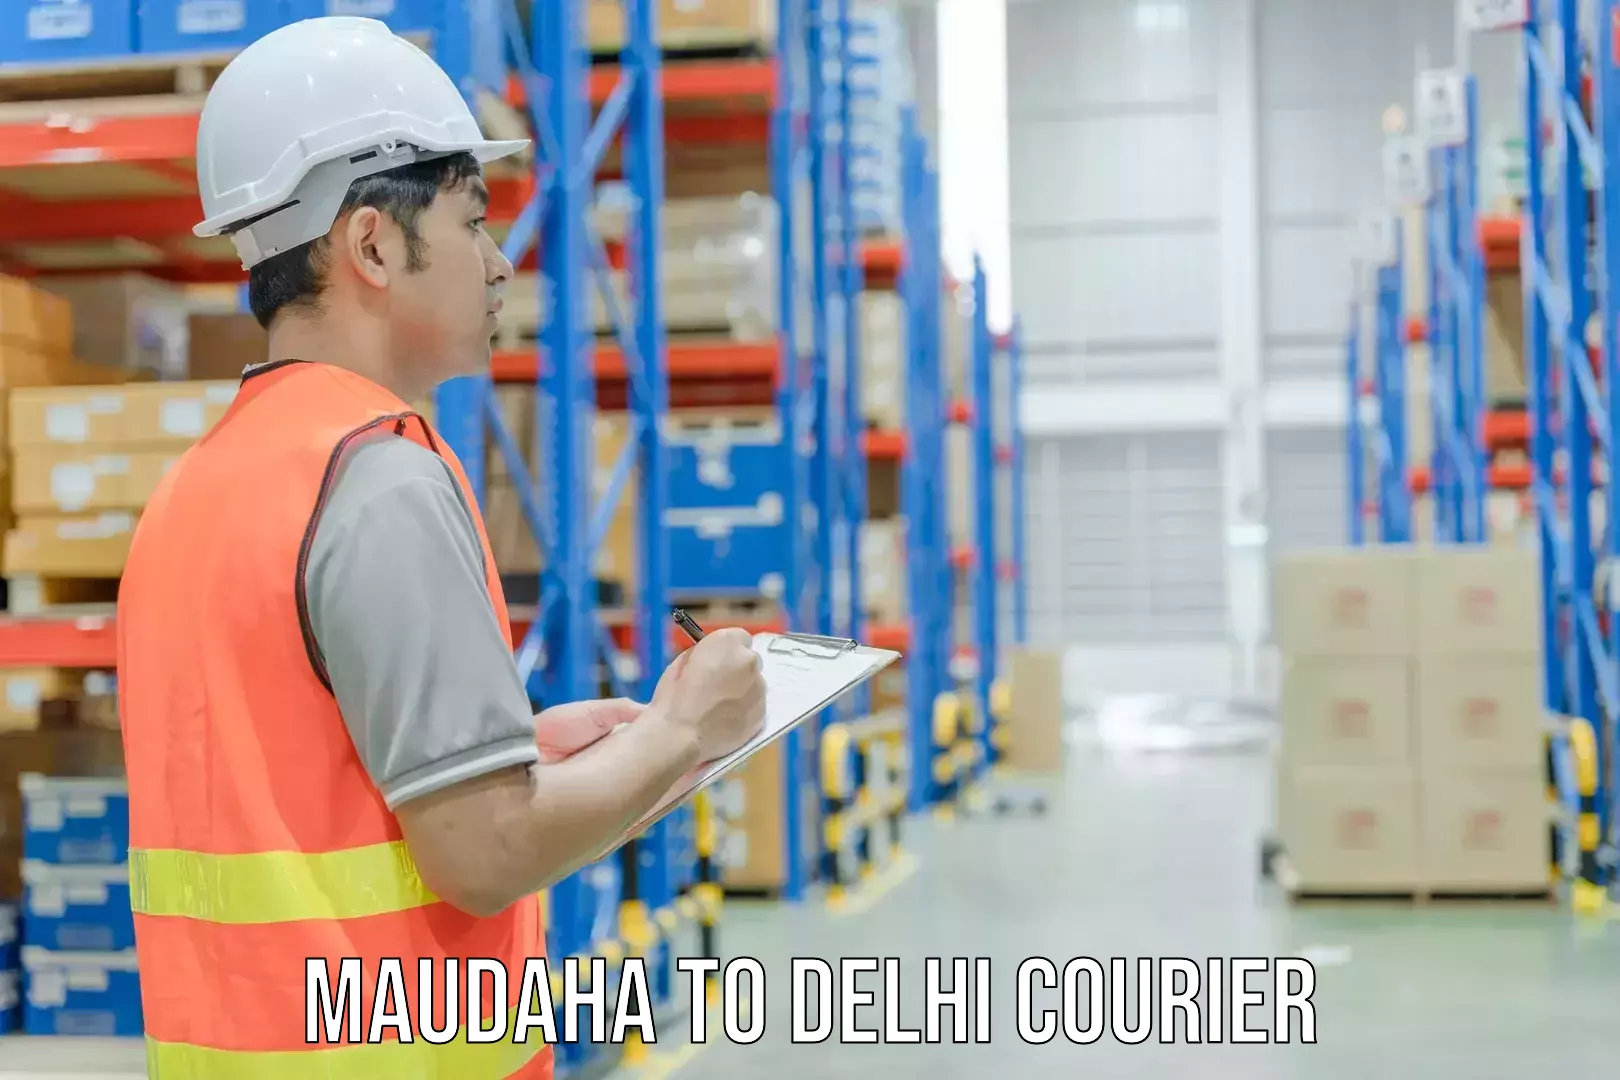 End-to-end delivery Maudaha to Delhi